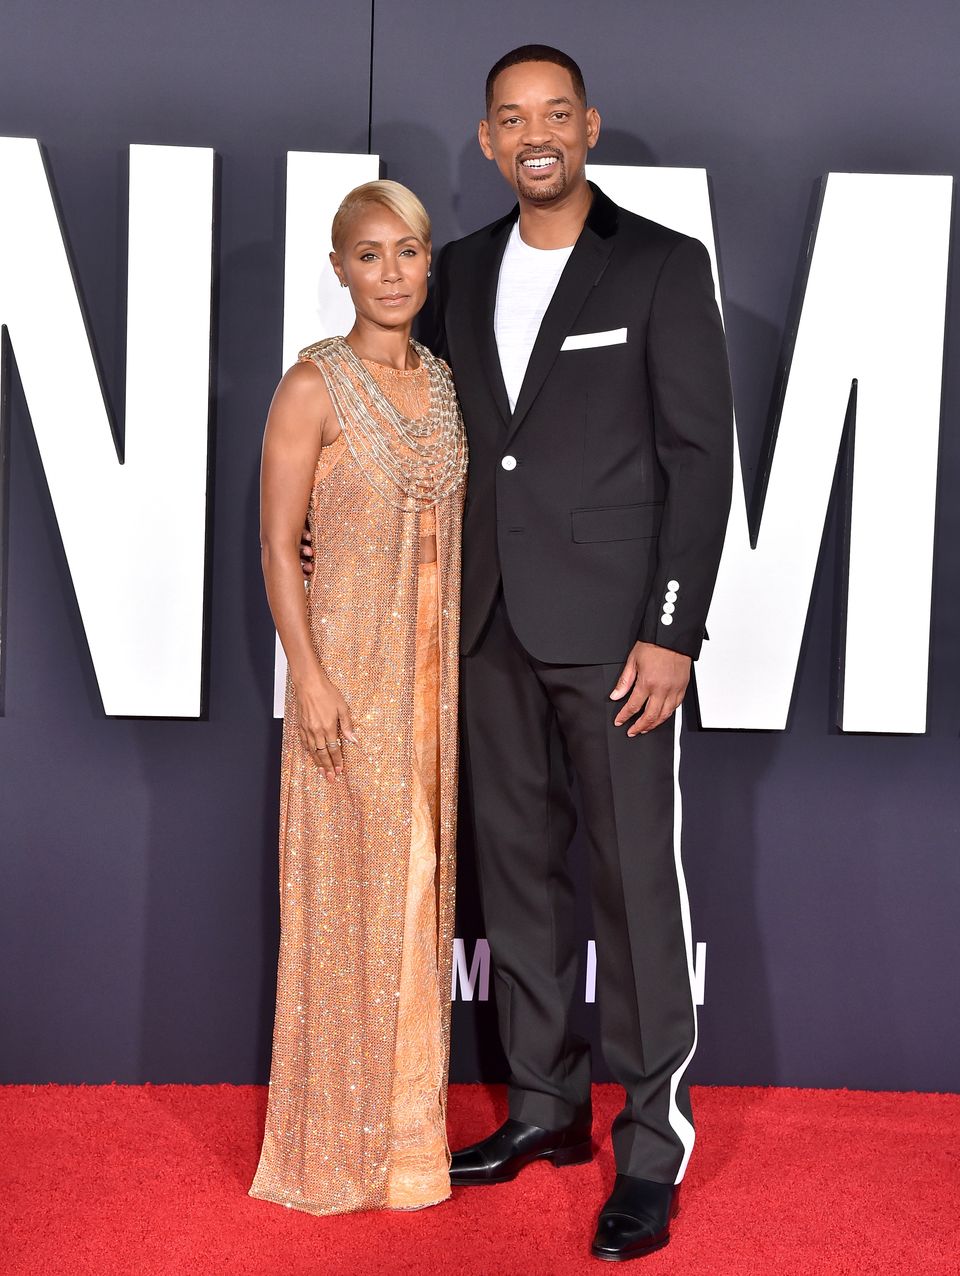 Jada Pinkett-Smith and Will Smith attend Paramount Pictures' Premiere of "Gemini Man" on October 06, 2019 in Hollywood, California. | Source: Getty Images